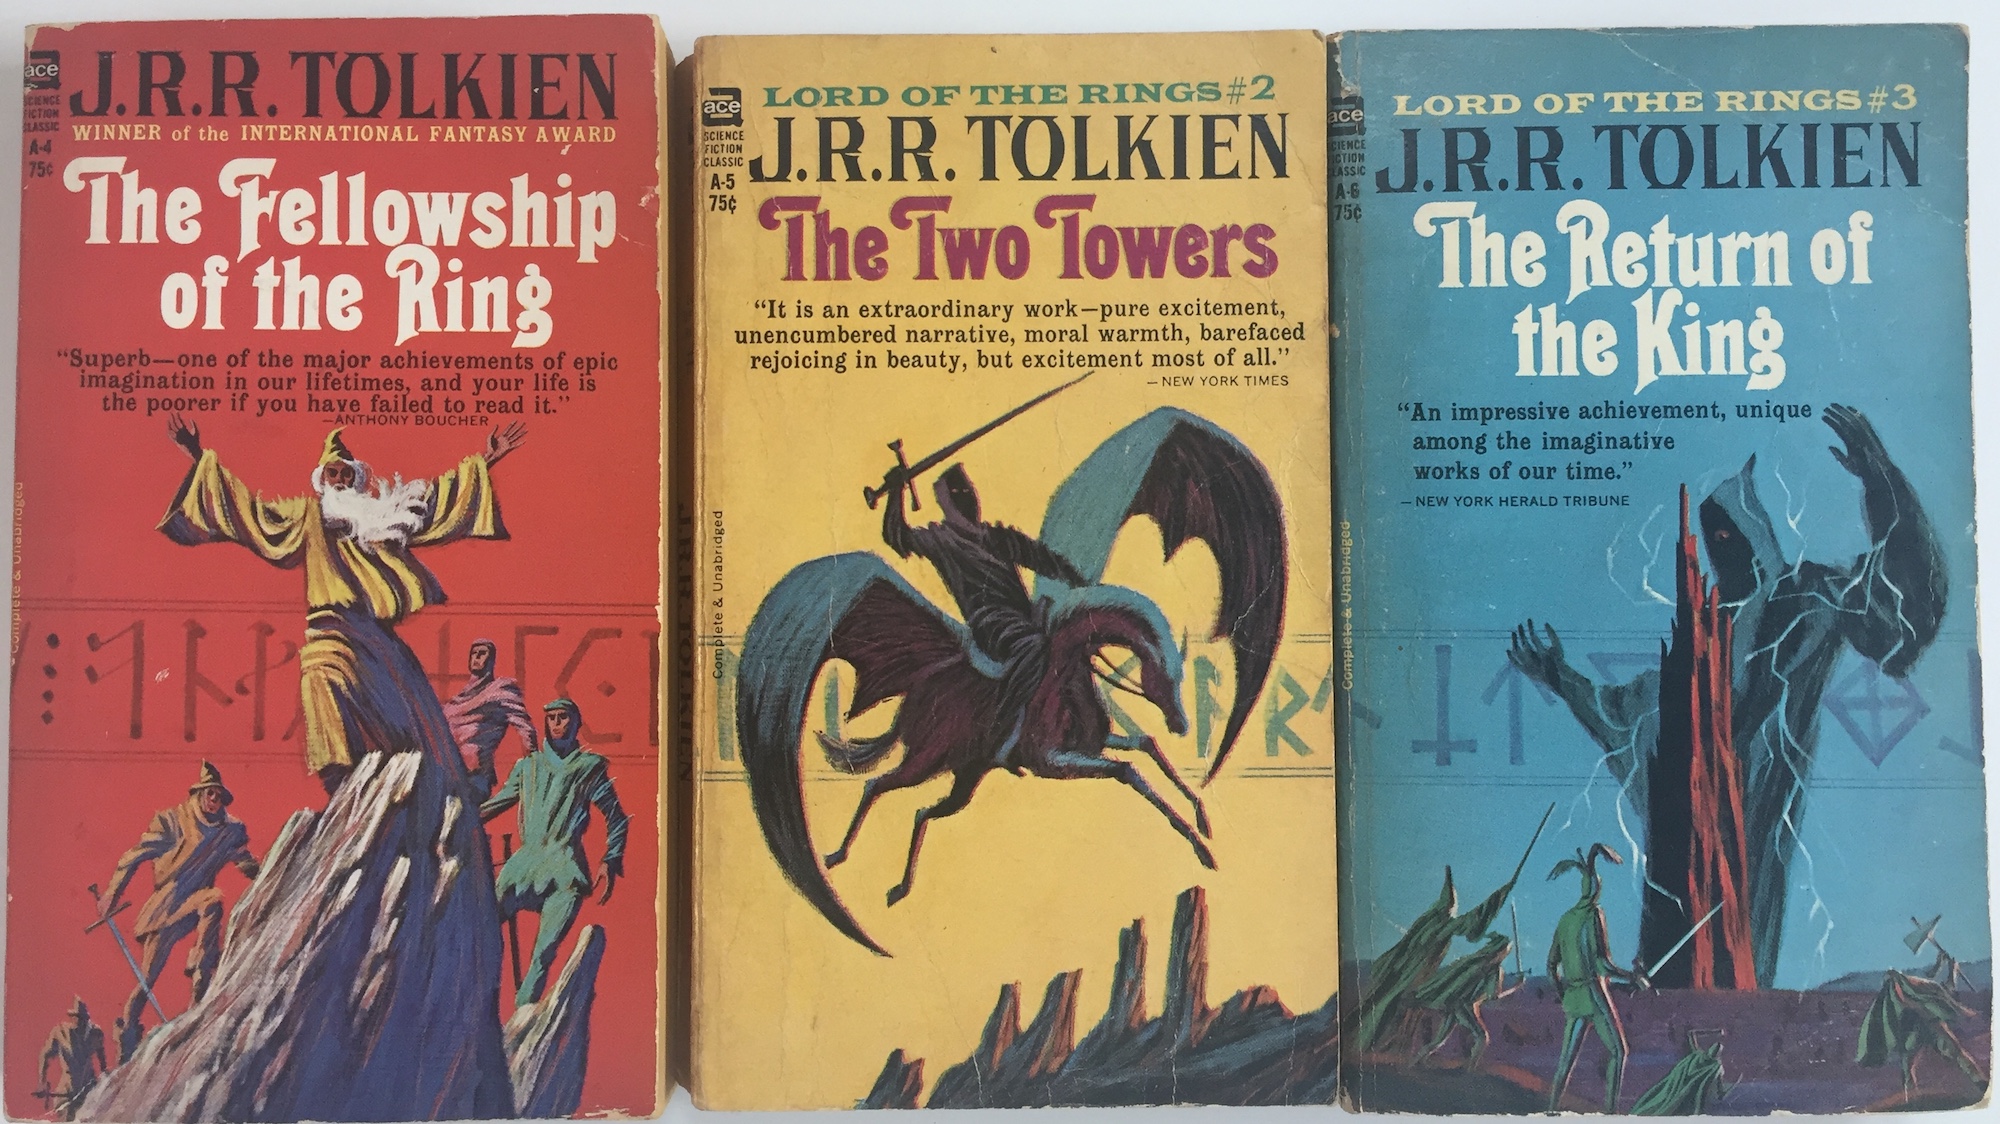 Ace Lord of the Rings covers.jpg